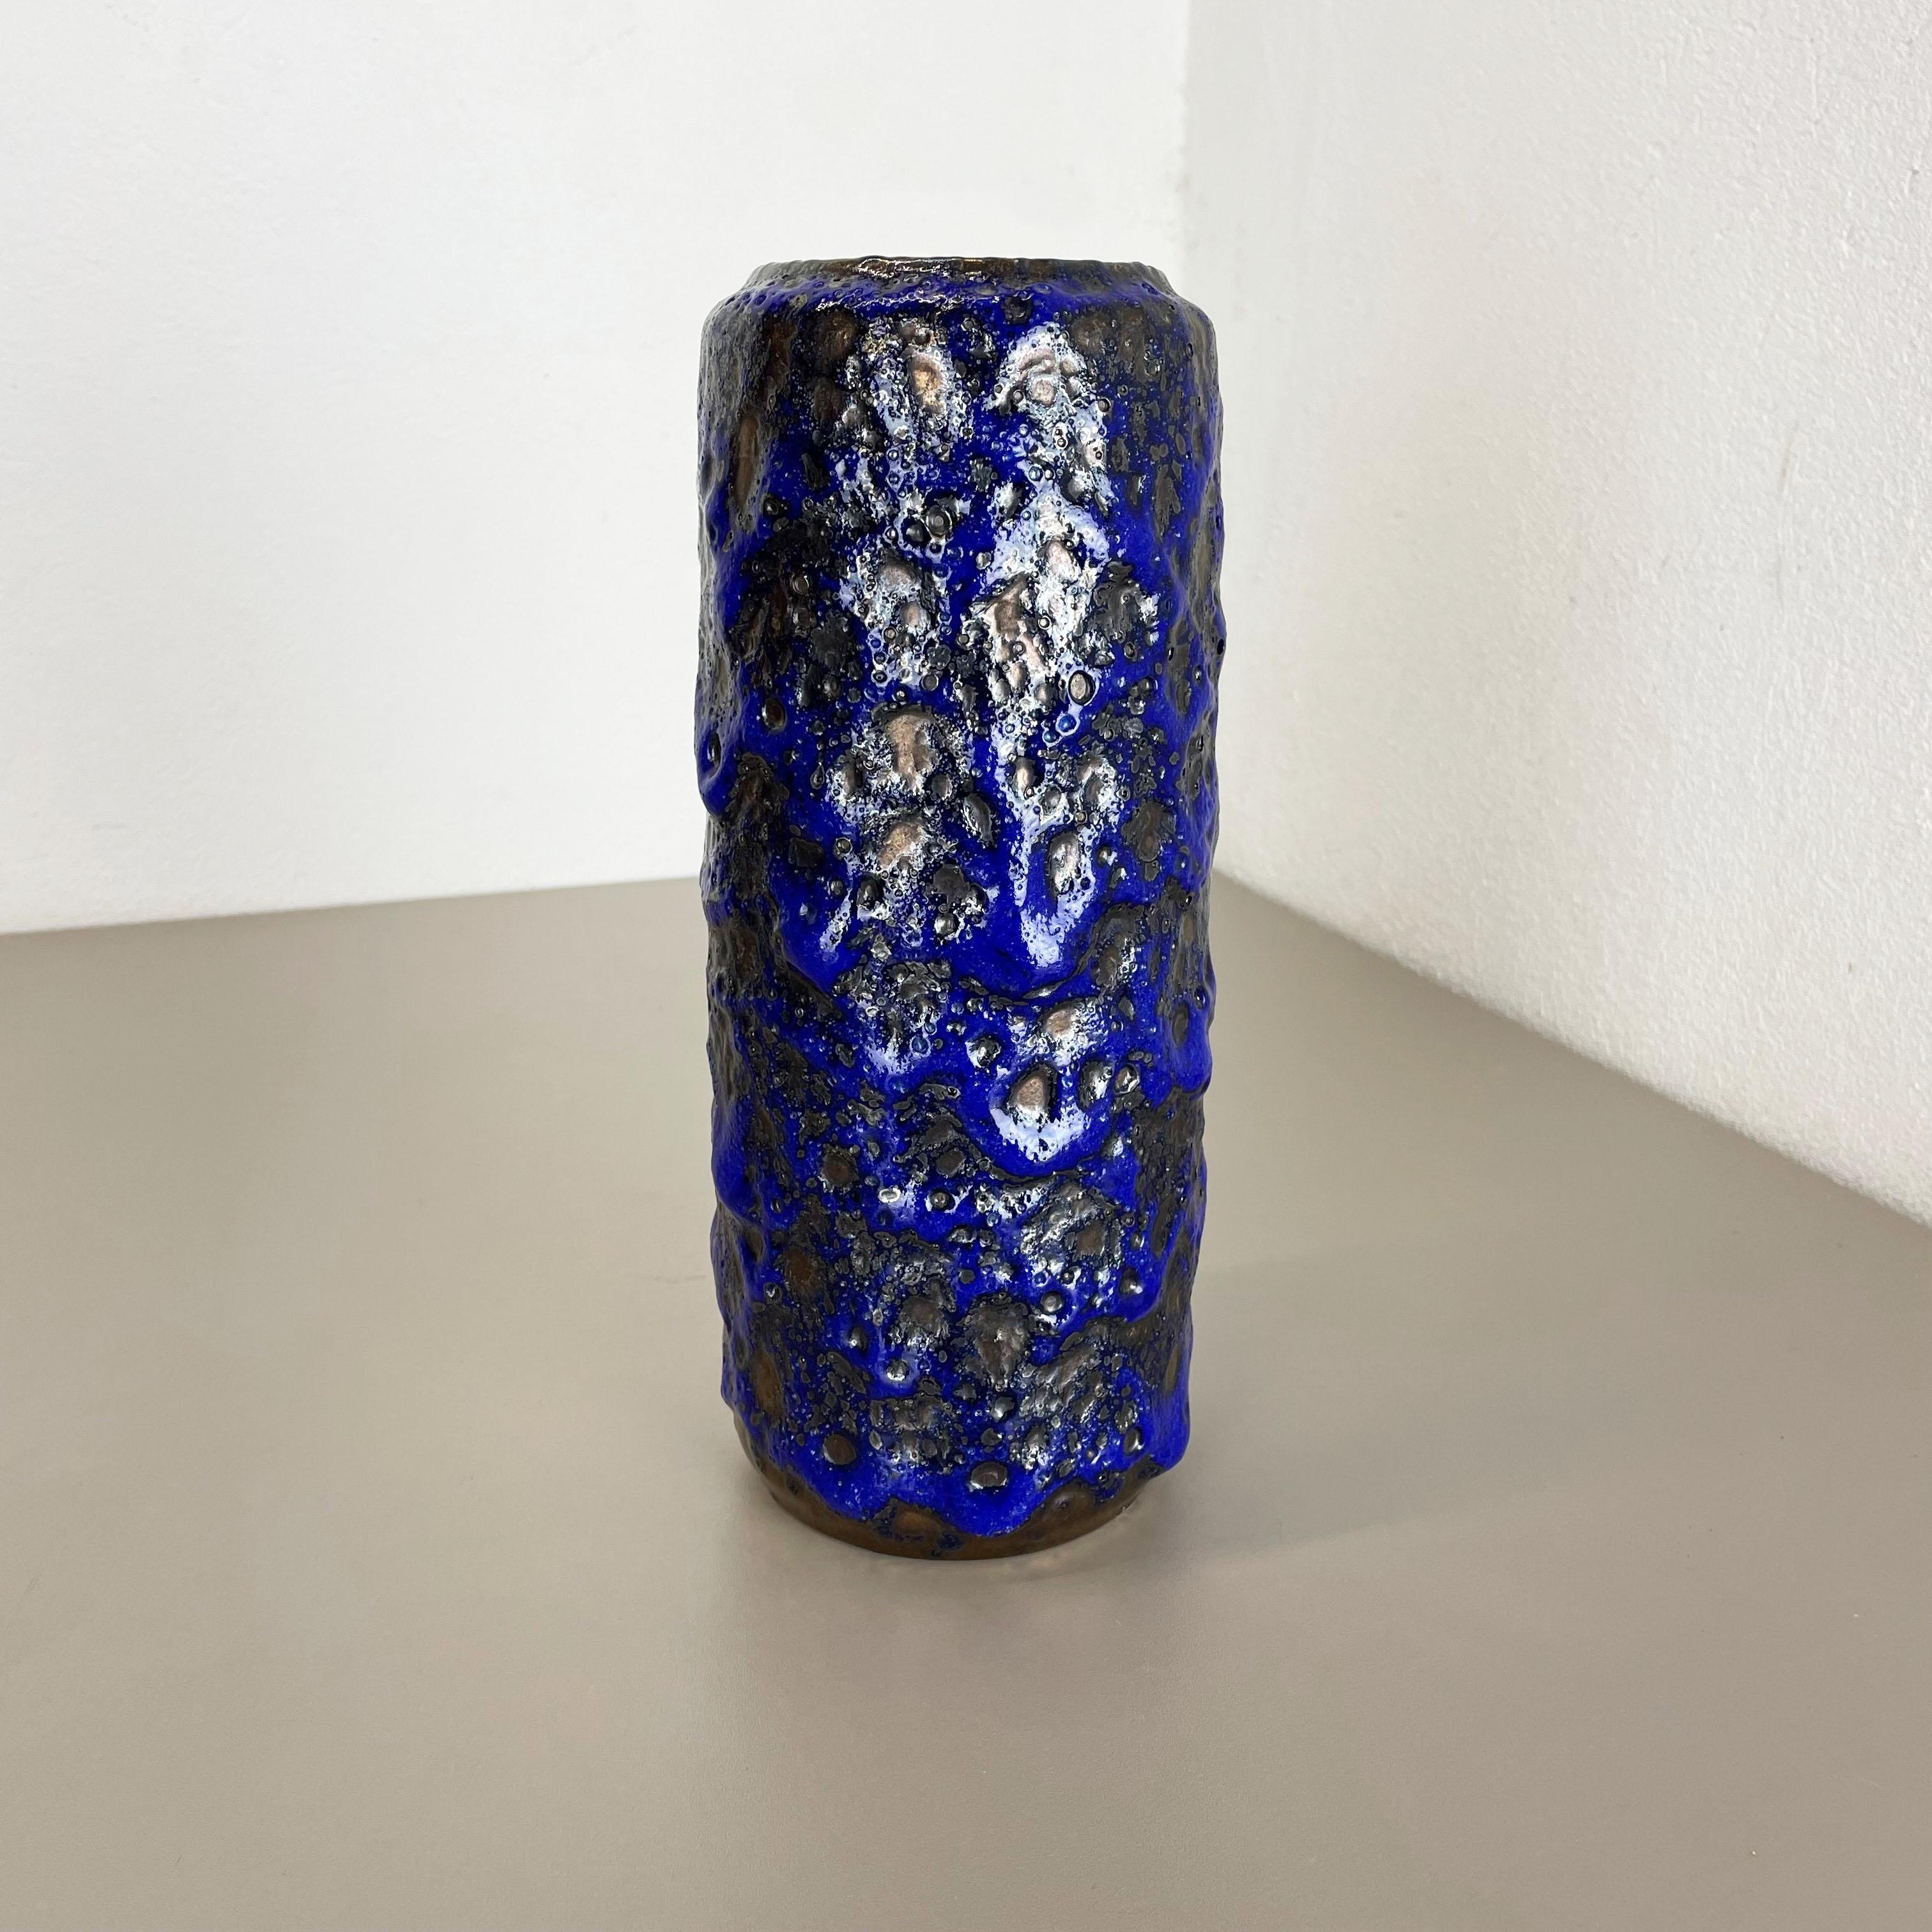 Article:

Fat lava art vase, heavy Brutalist glaze


Producer:

Scheurich, Germany



Decade:

1970s




This original vintage vase was produced in the 1970s in Germany. It is made of ceramic pottery in fat lava optic with abstract illustration in